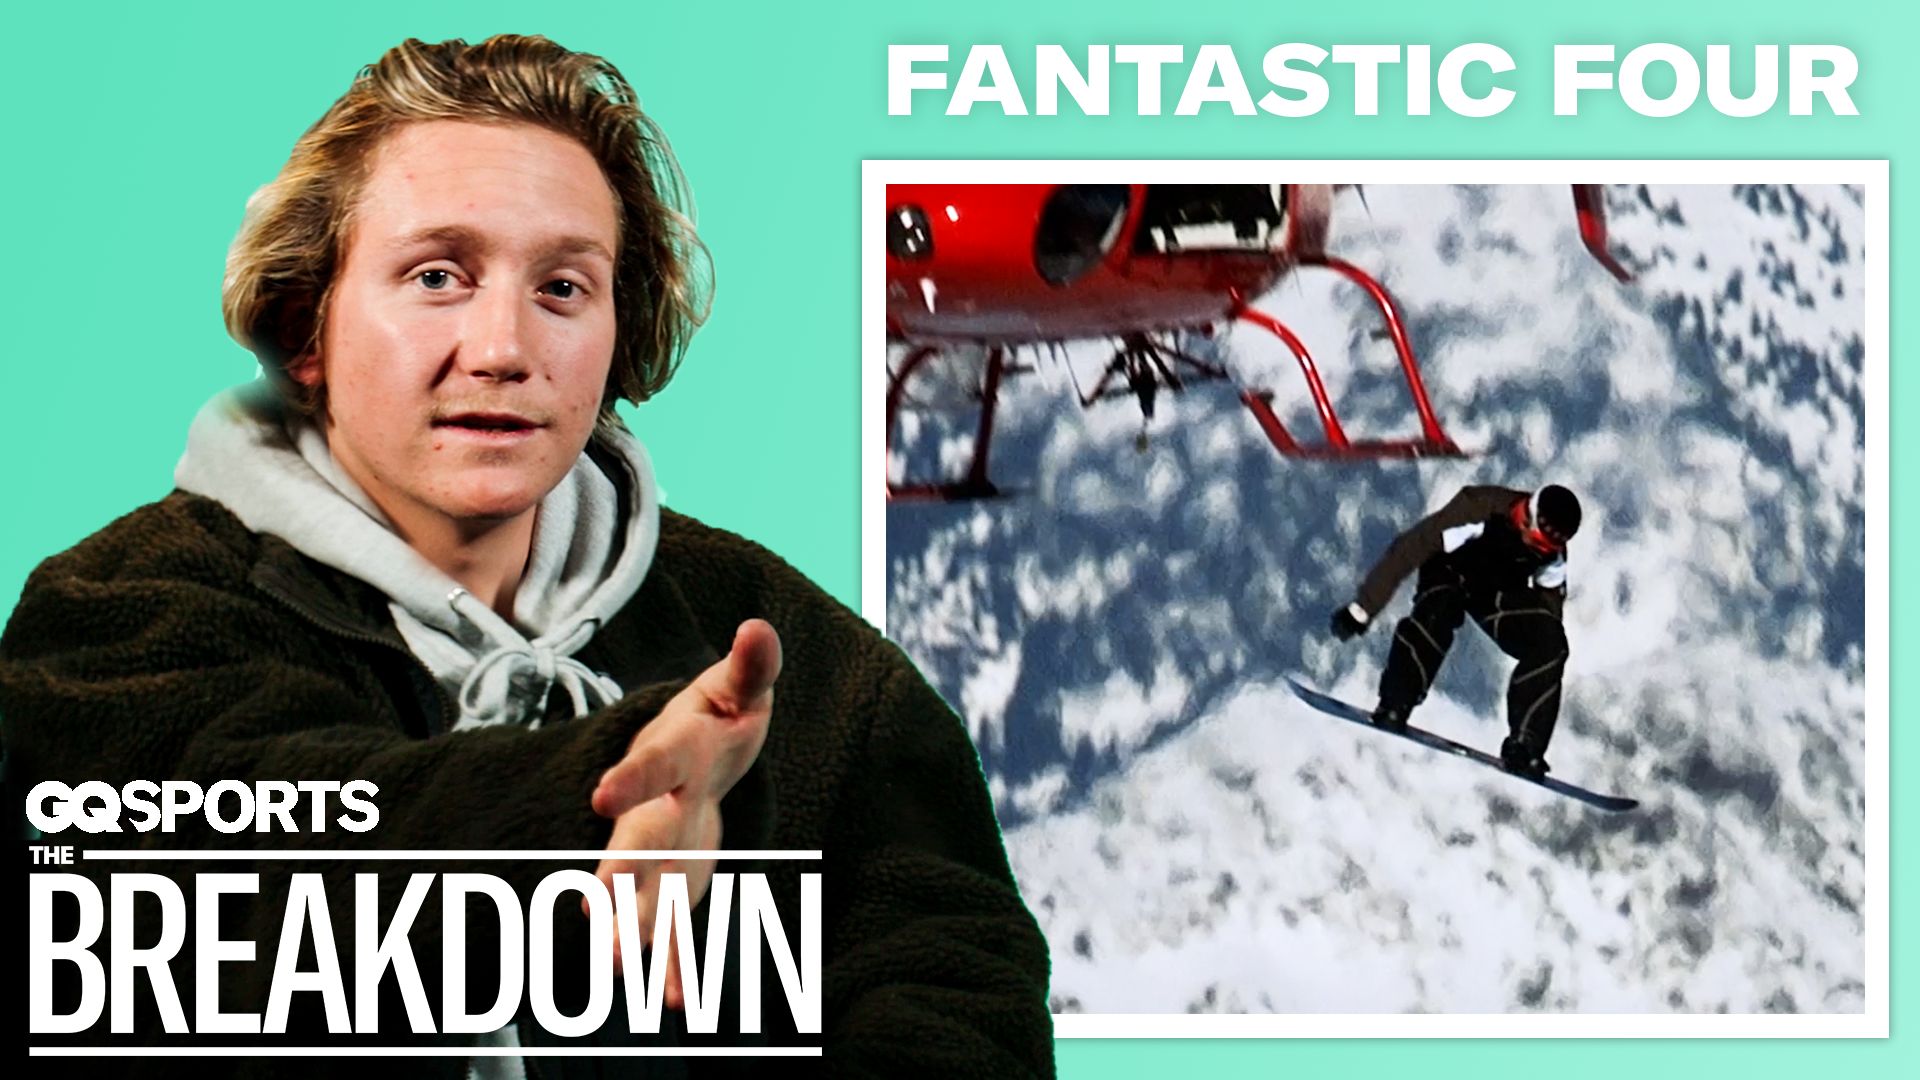 Look: Cover of New Basketball Magazine Looks Like Snowboarder From